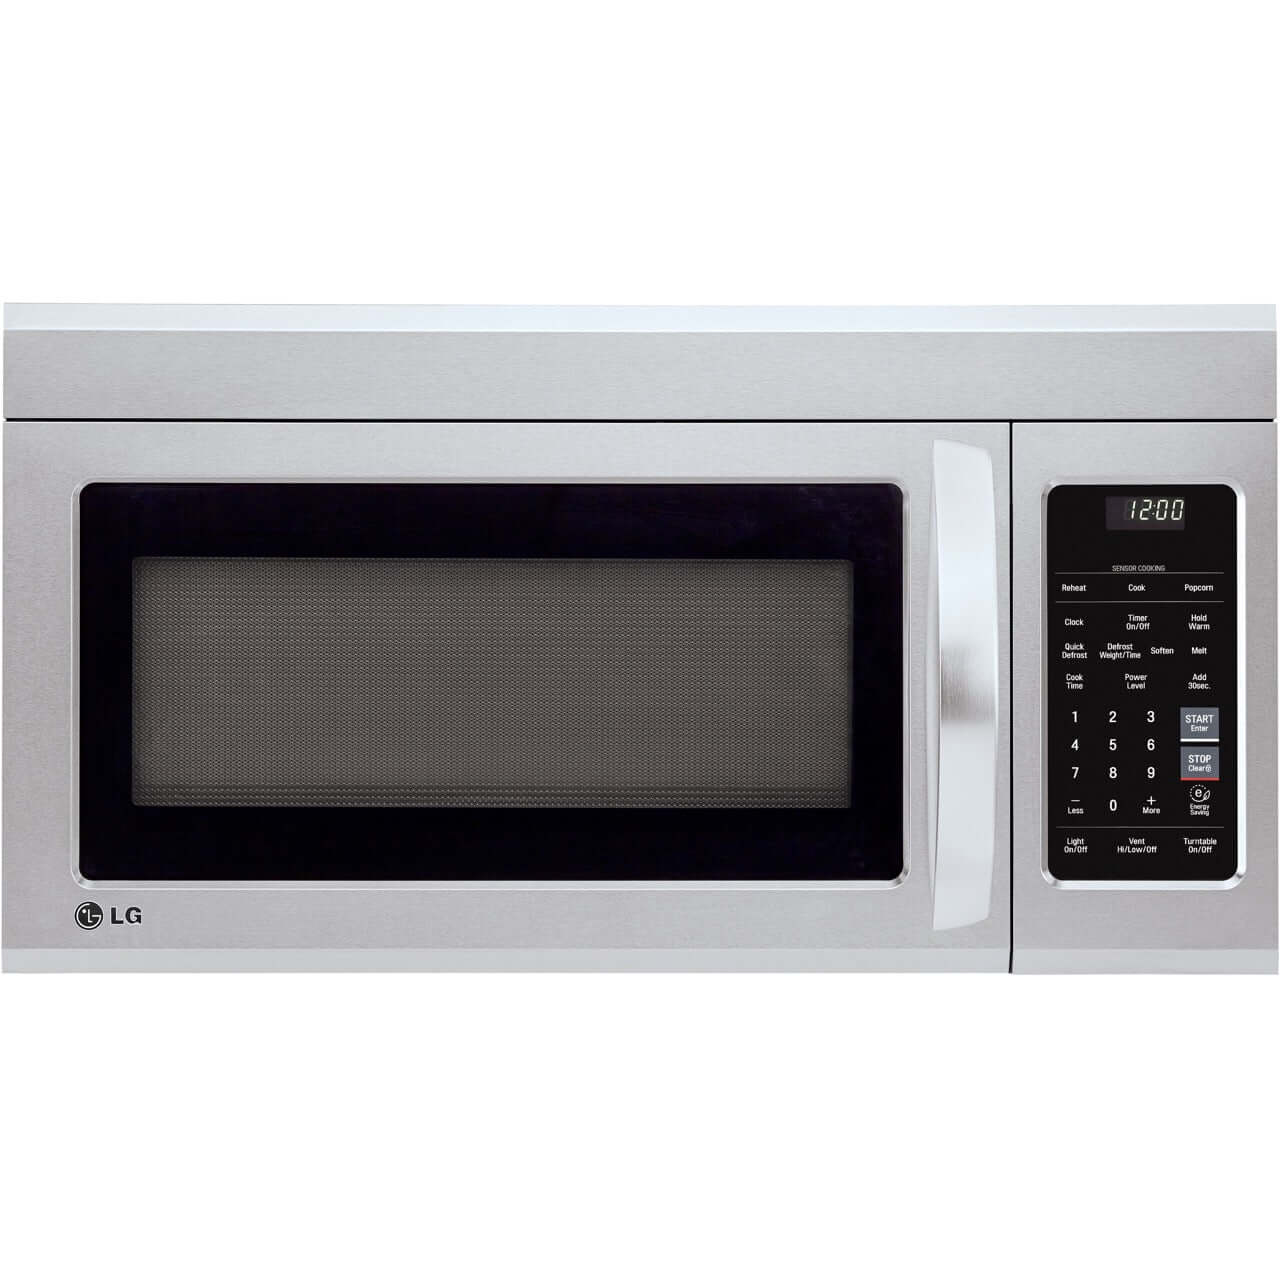 LG 1.8-Cu. Ft. 30 in. Over-the-Range Microwave with EasyClean, Print Proof Stainless Steel (LMV1831SS)